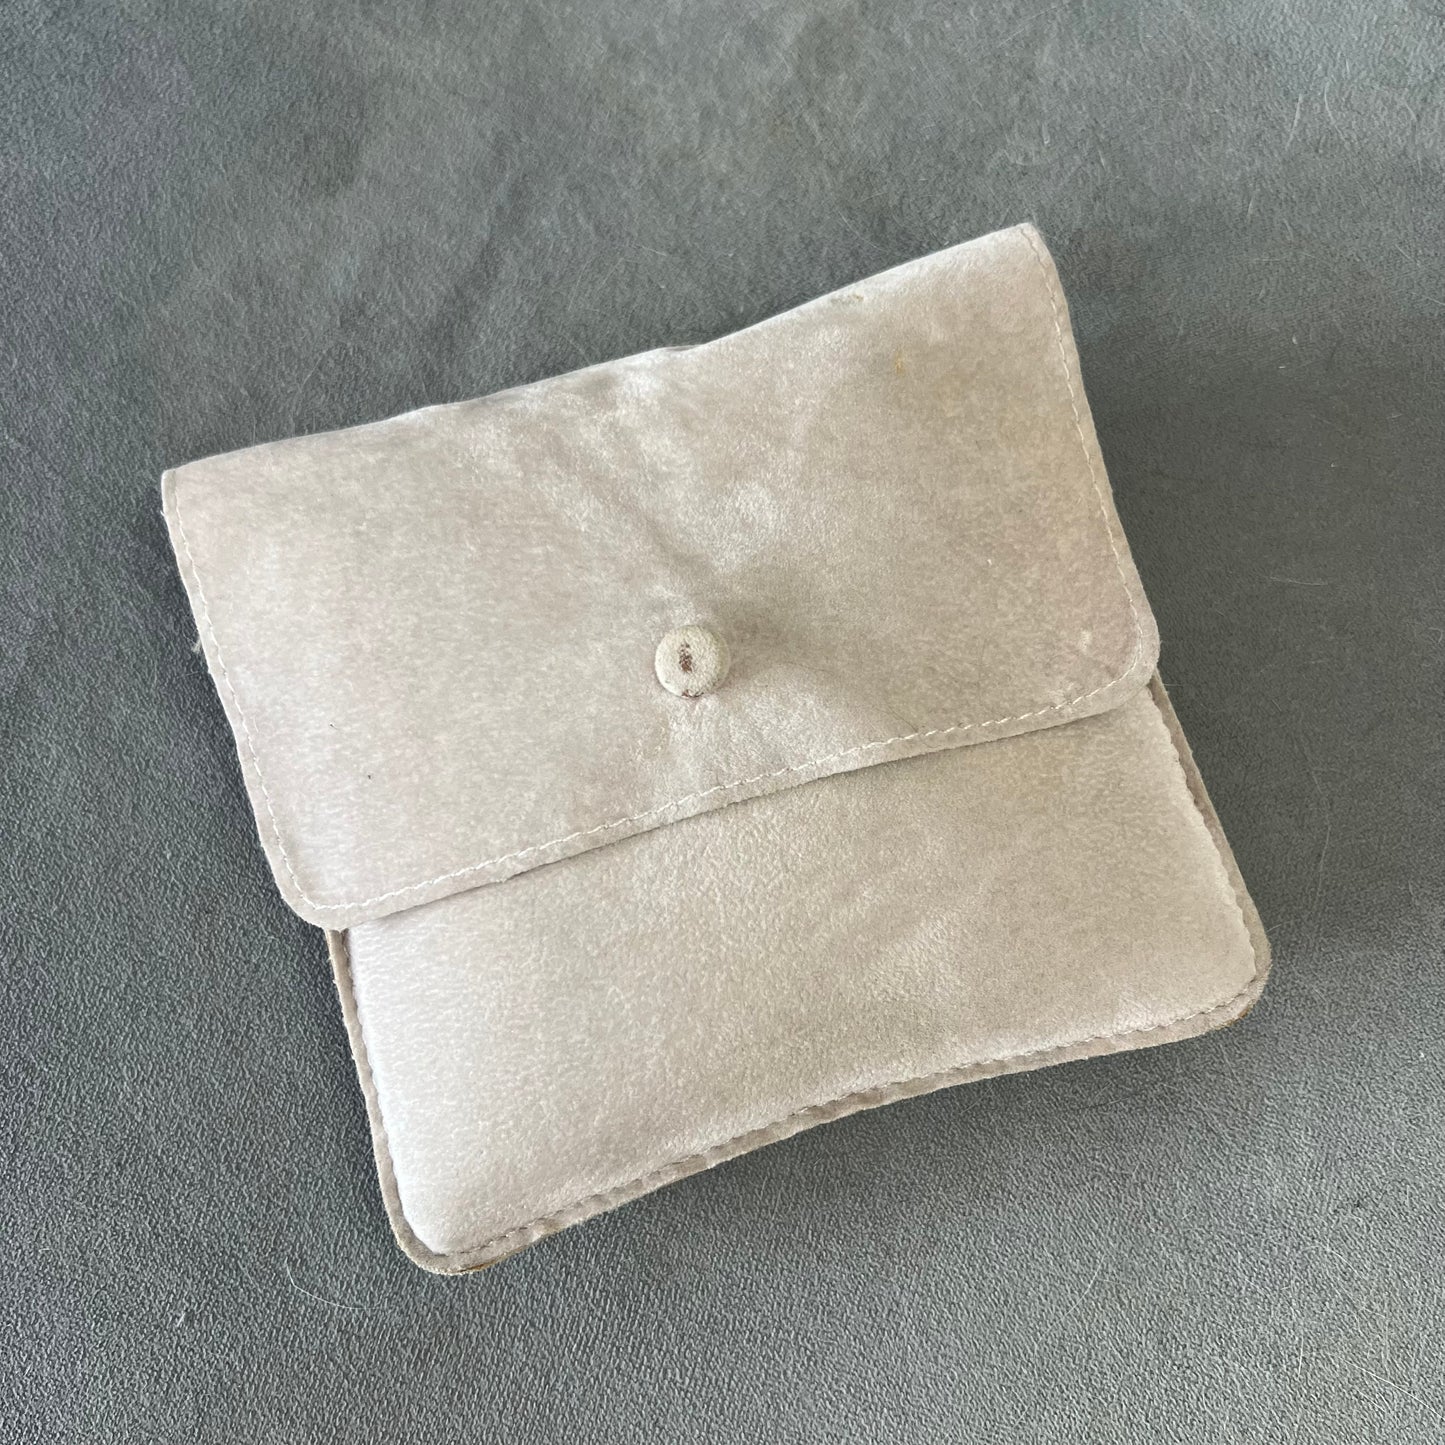 VAN CLEEF @ ARPELS Gray Velvet Pouch with Pillow 5.5x5 inches